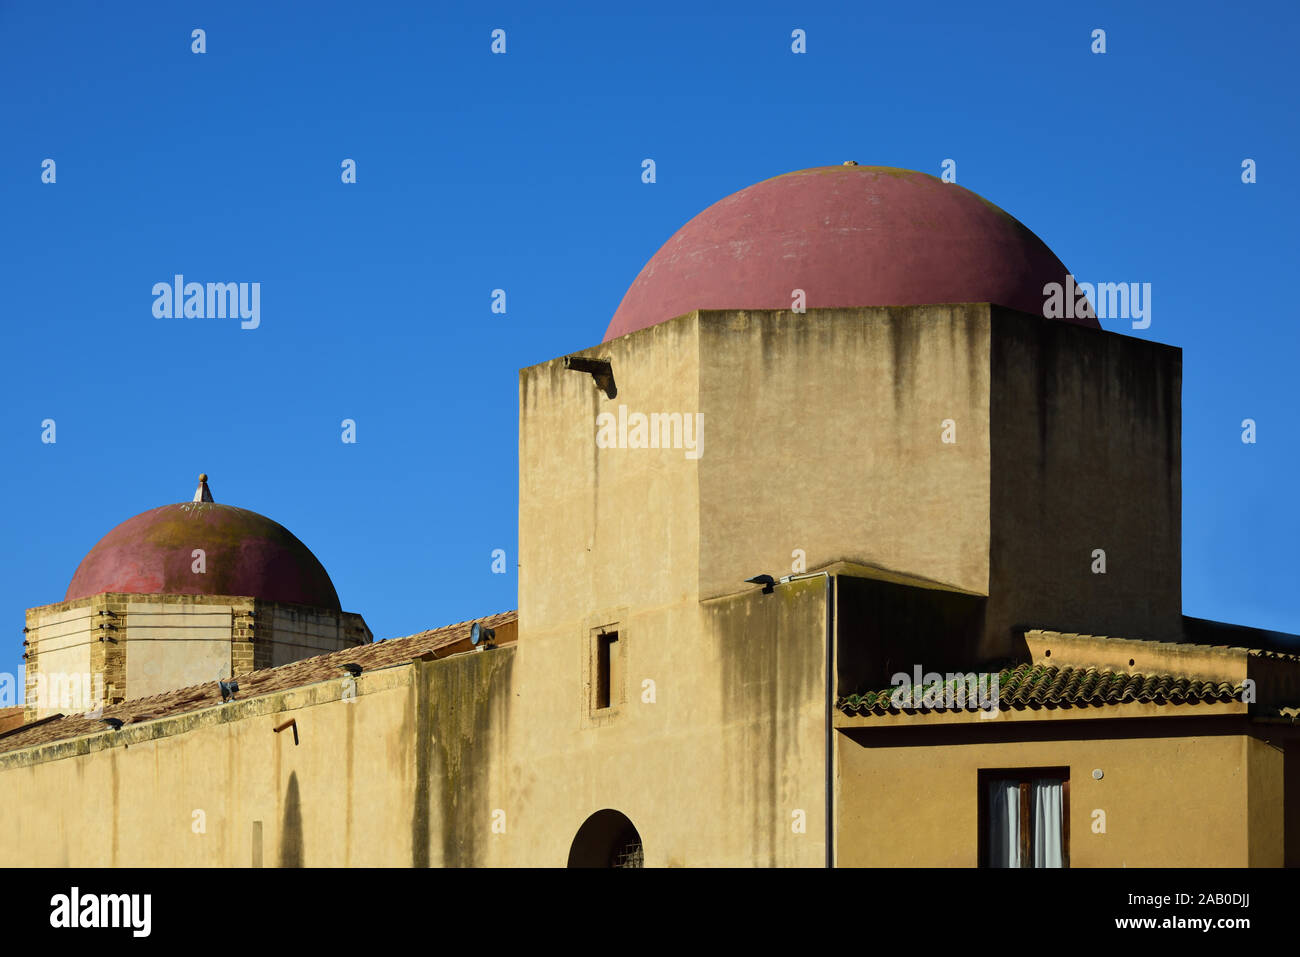 Historic towers with red round domes in the old town of Mazara del Vallo, Sicily, Italy against a blue sky in summer Stock Photo